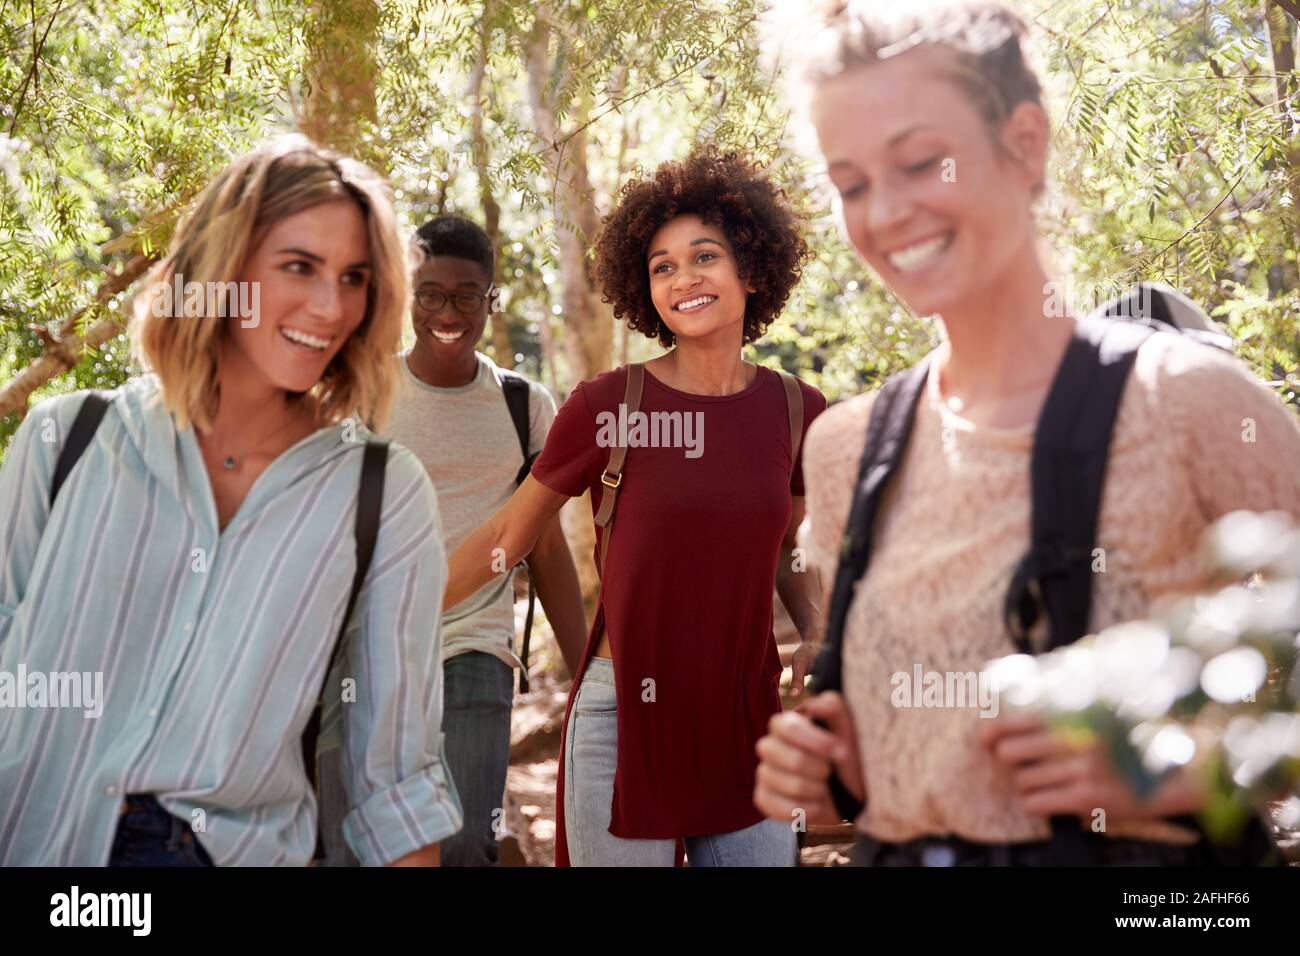 Young adult friends hiking in a forest laughing together, close up Stock Photo